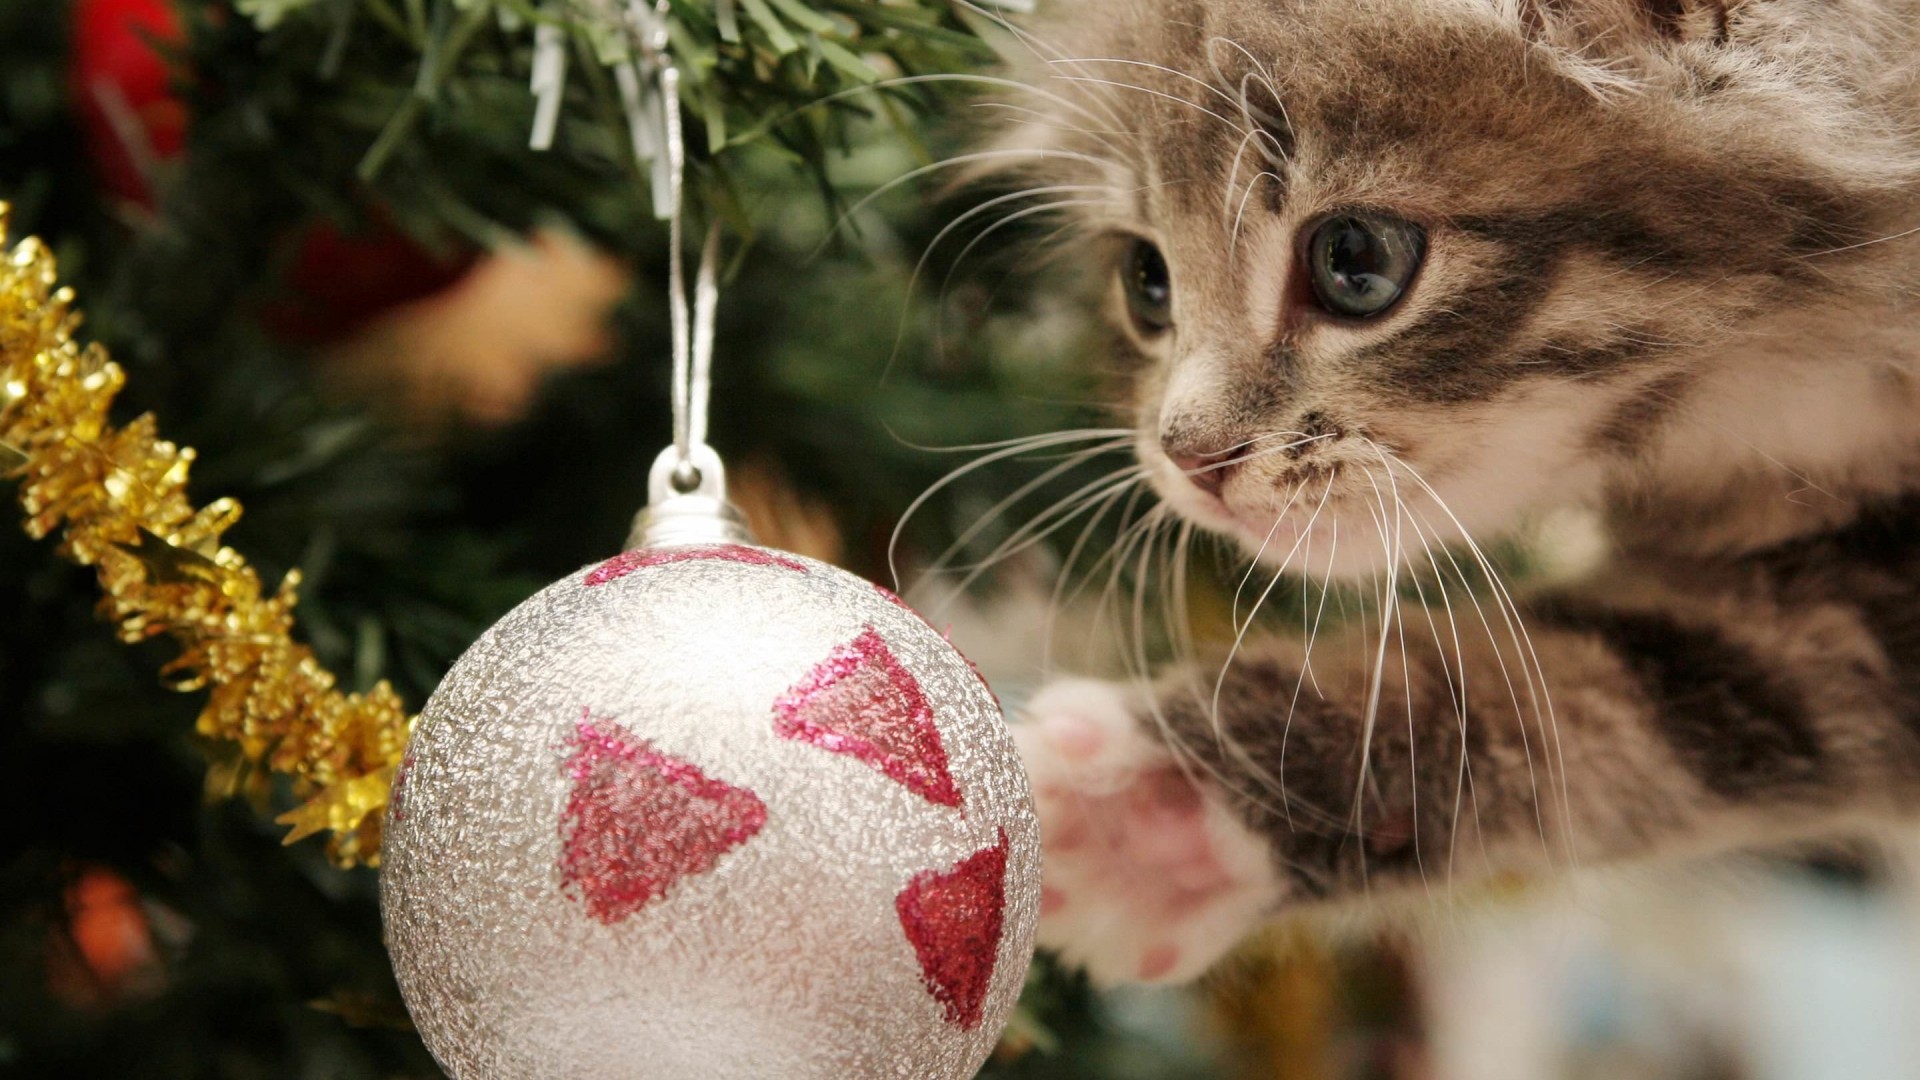 Kitten Playing With Christmas Ornaments Wallpaper for Desktop 1920x1080